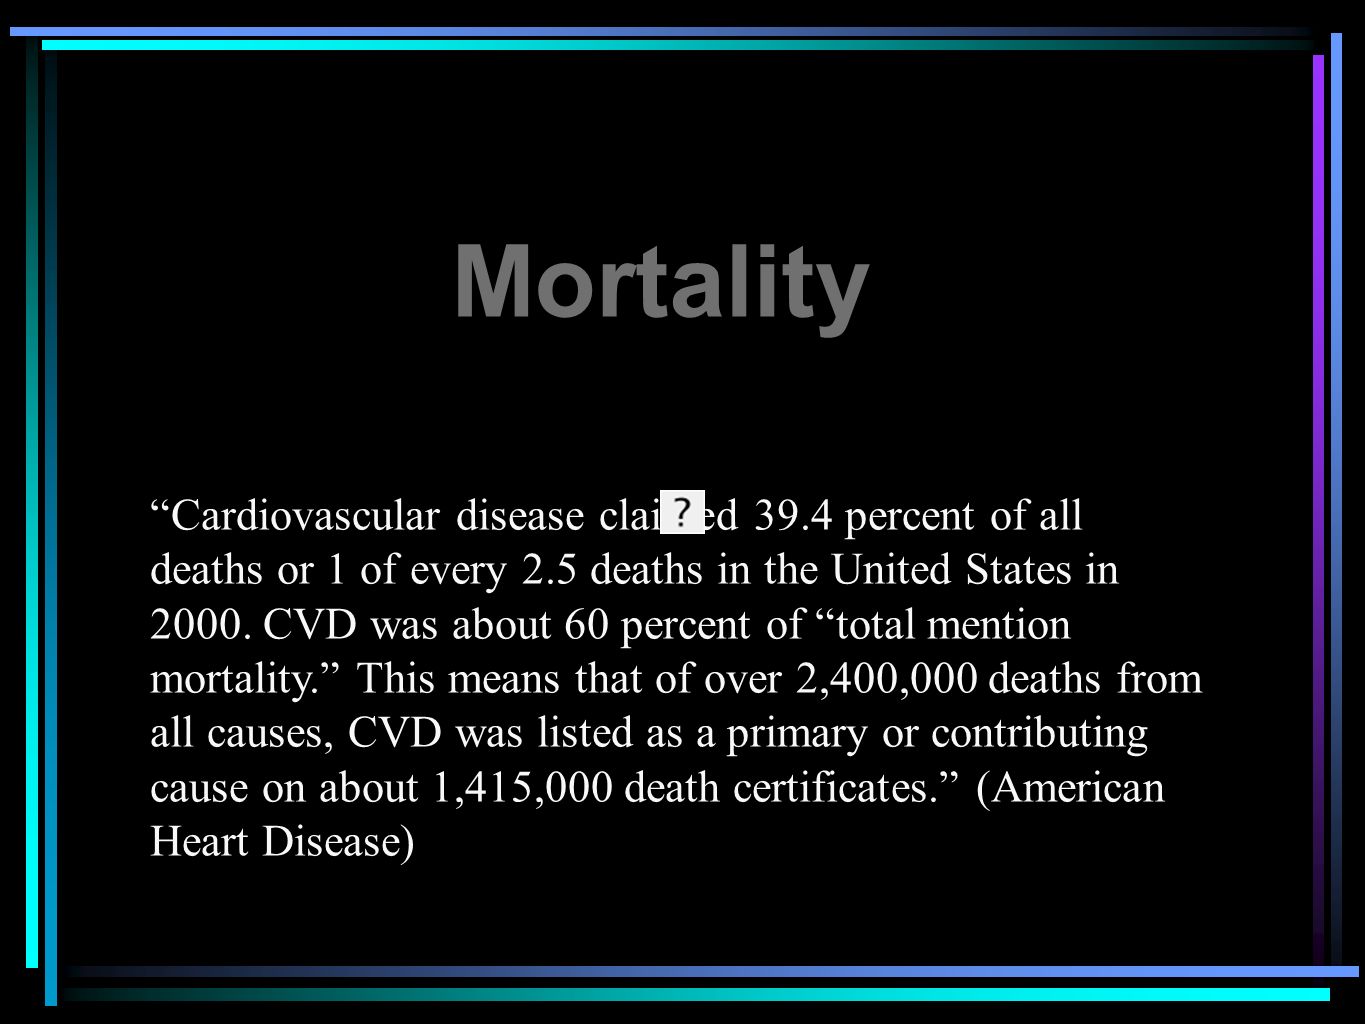 Cardiovascular disease claimed 39.4 percent of all deaths or 1 of every 2.5 deaths in the United States in 2000.